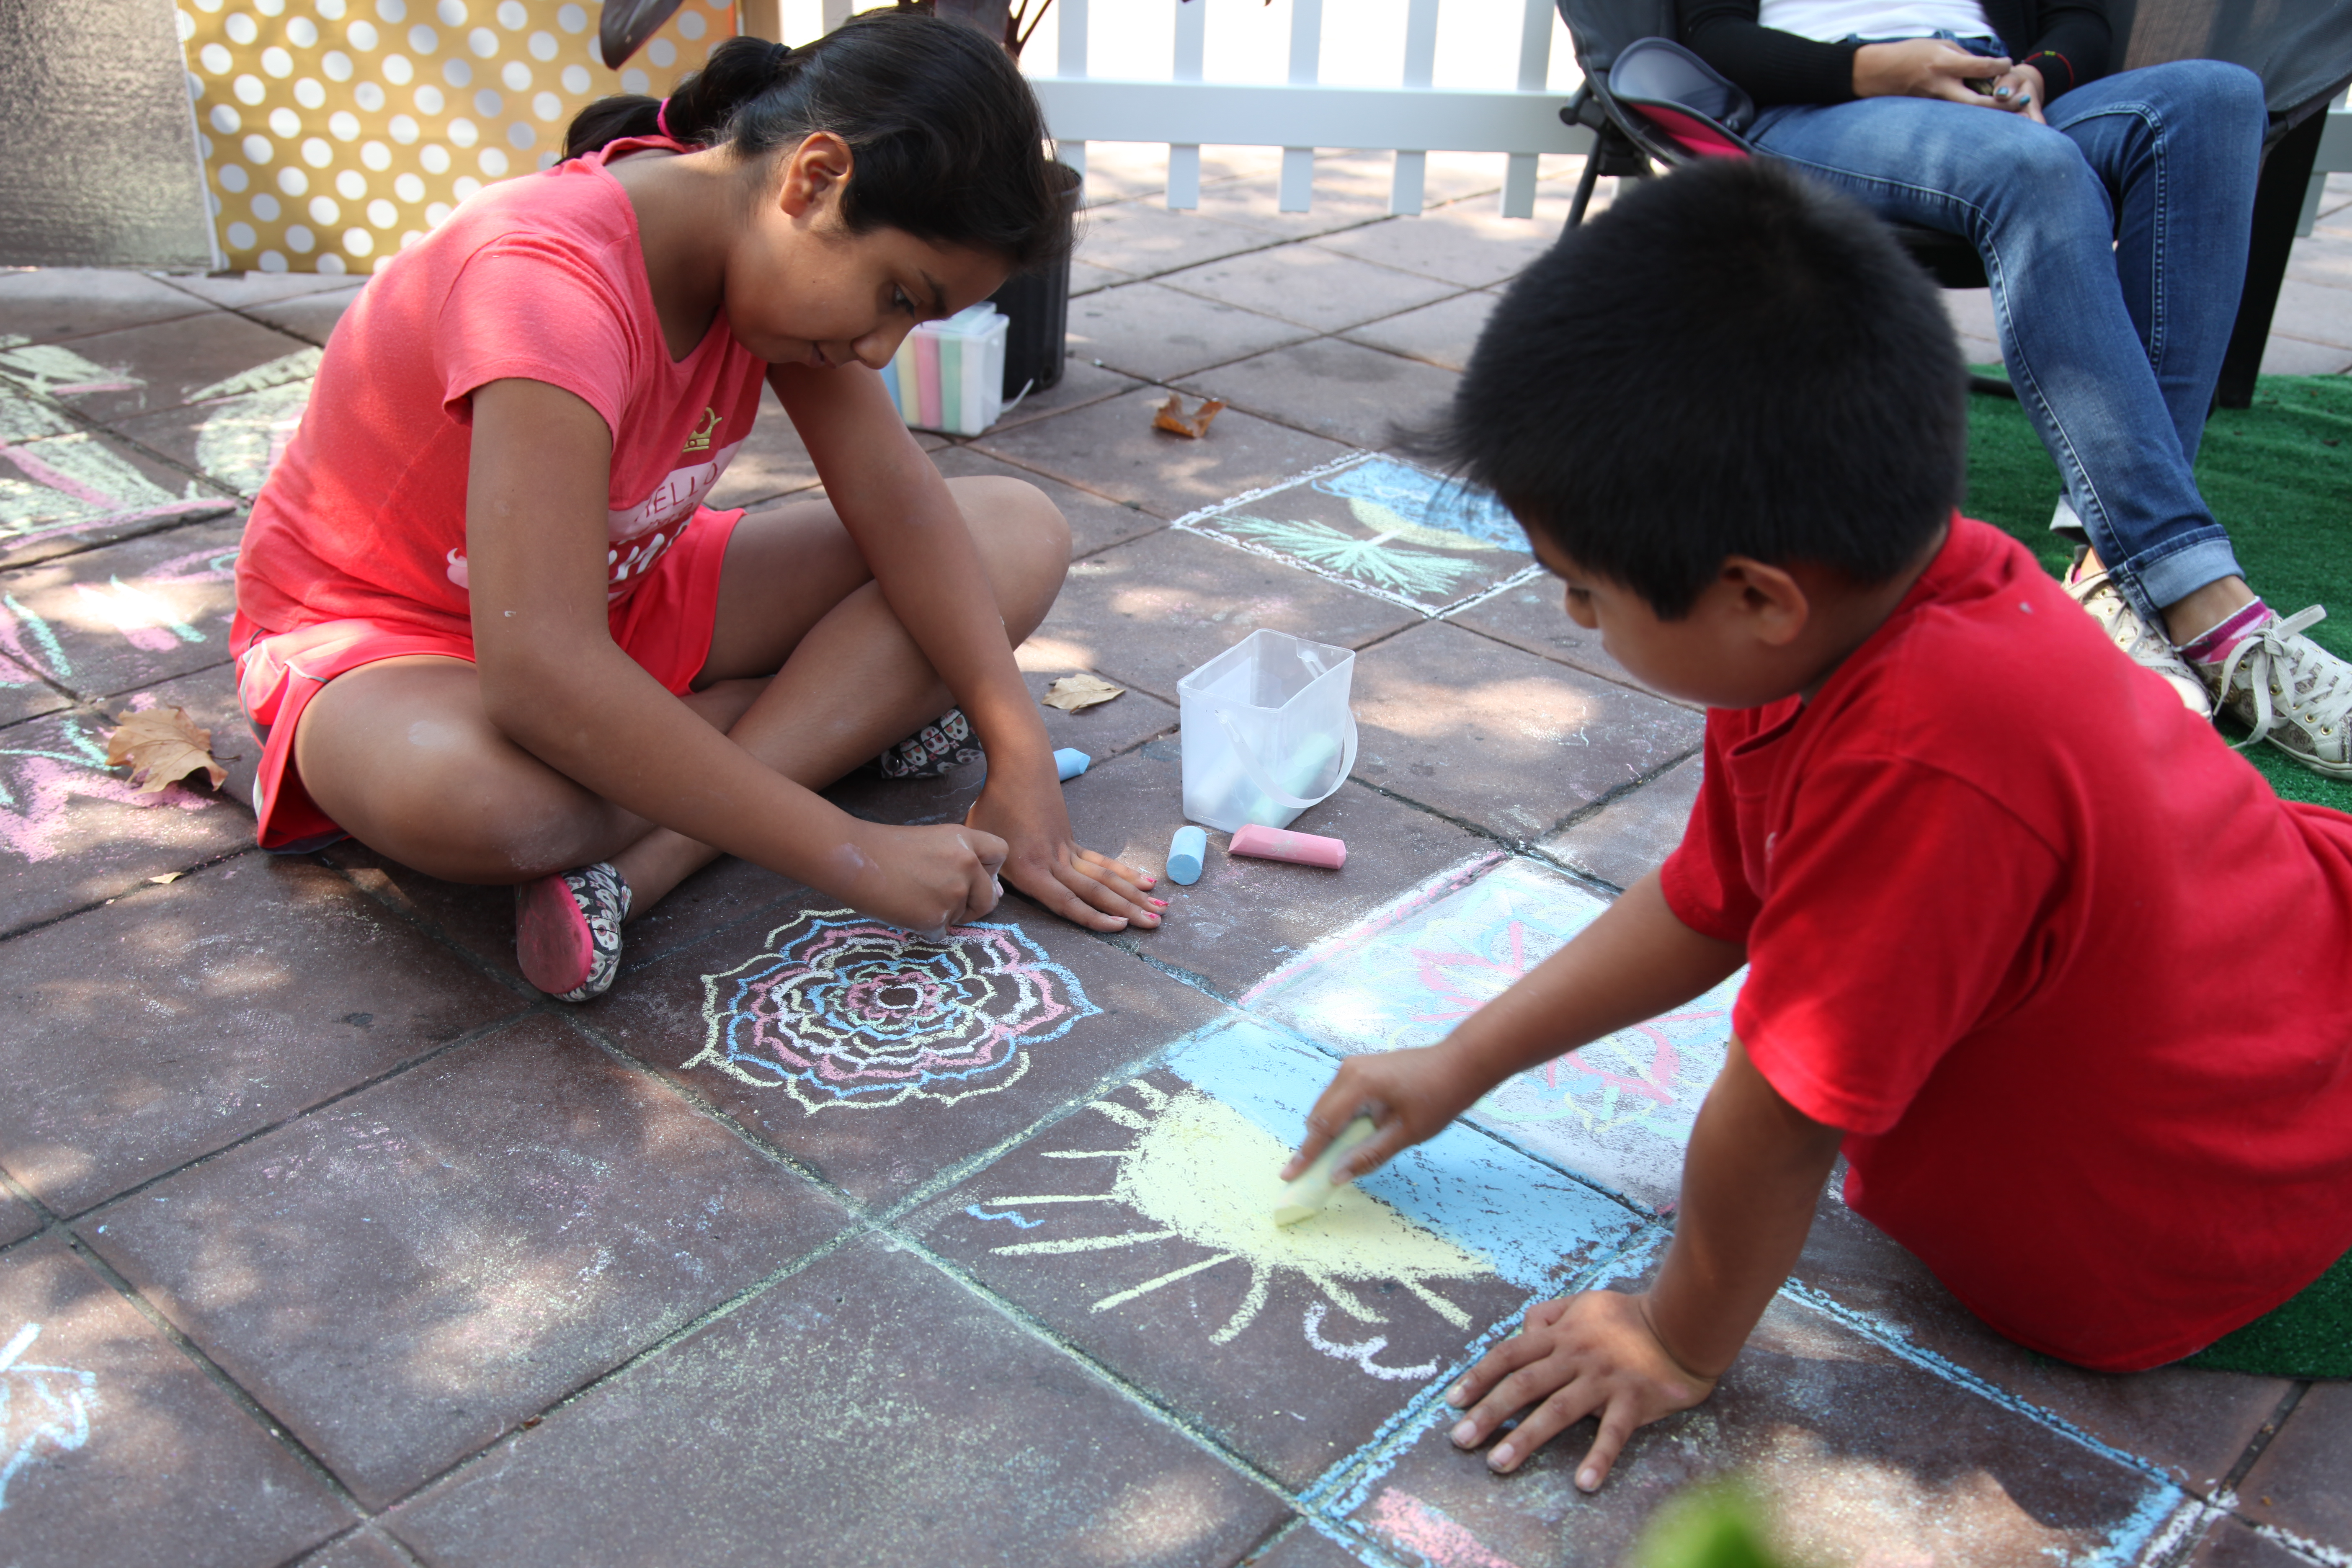 Sonia, 11, Brian 8, draw on the floor at Santa Ana resident's parklet in downtown Garden Grove. Photo by Kris Fortin